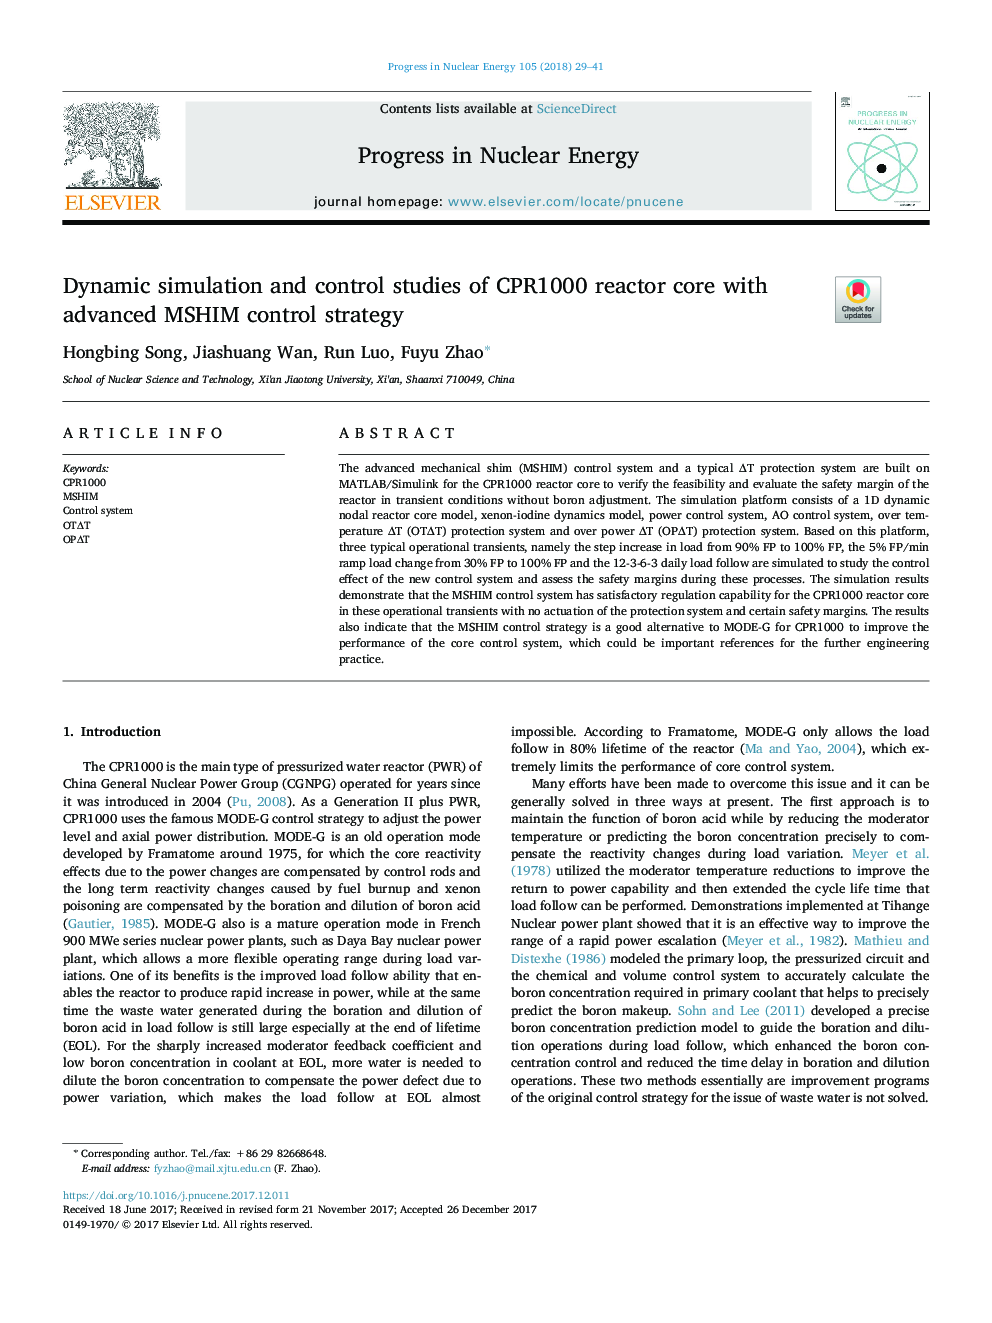 Dynamic simulation and control studies of CPR1000 reactor core with advanced MSHIM control strategy